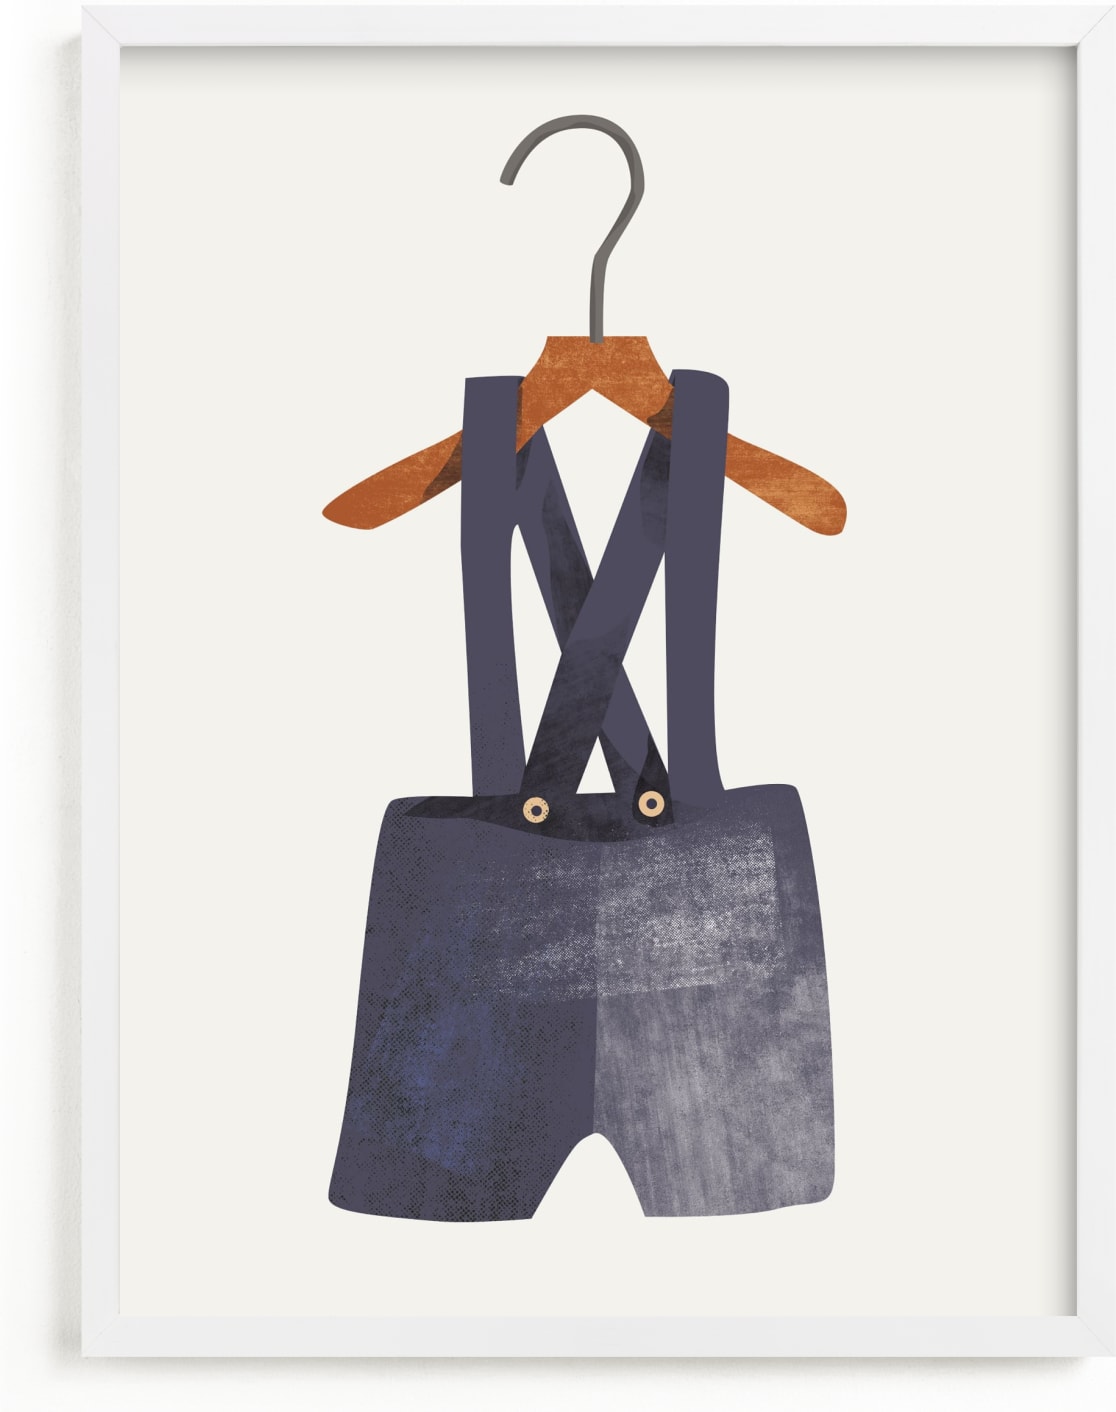 This is a blue nursery wall art by Haley Warner called Overalls.